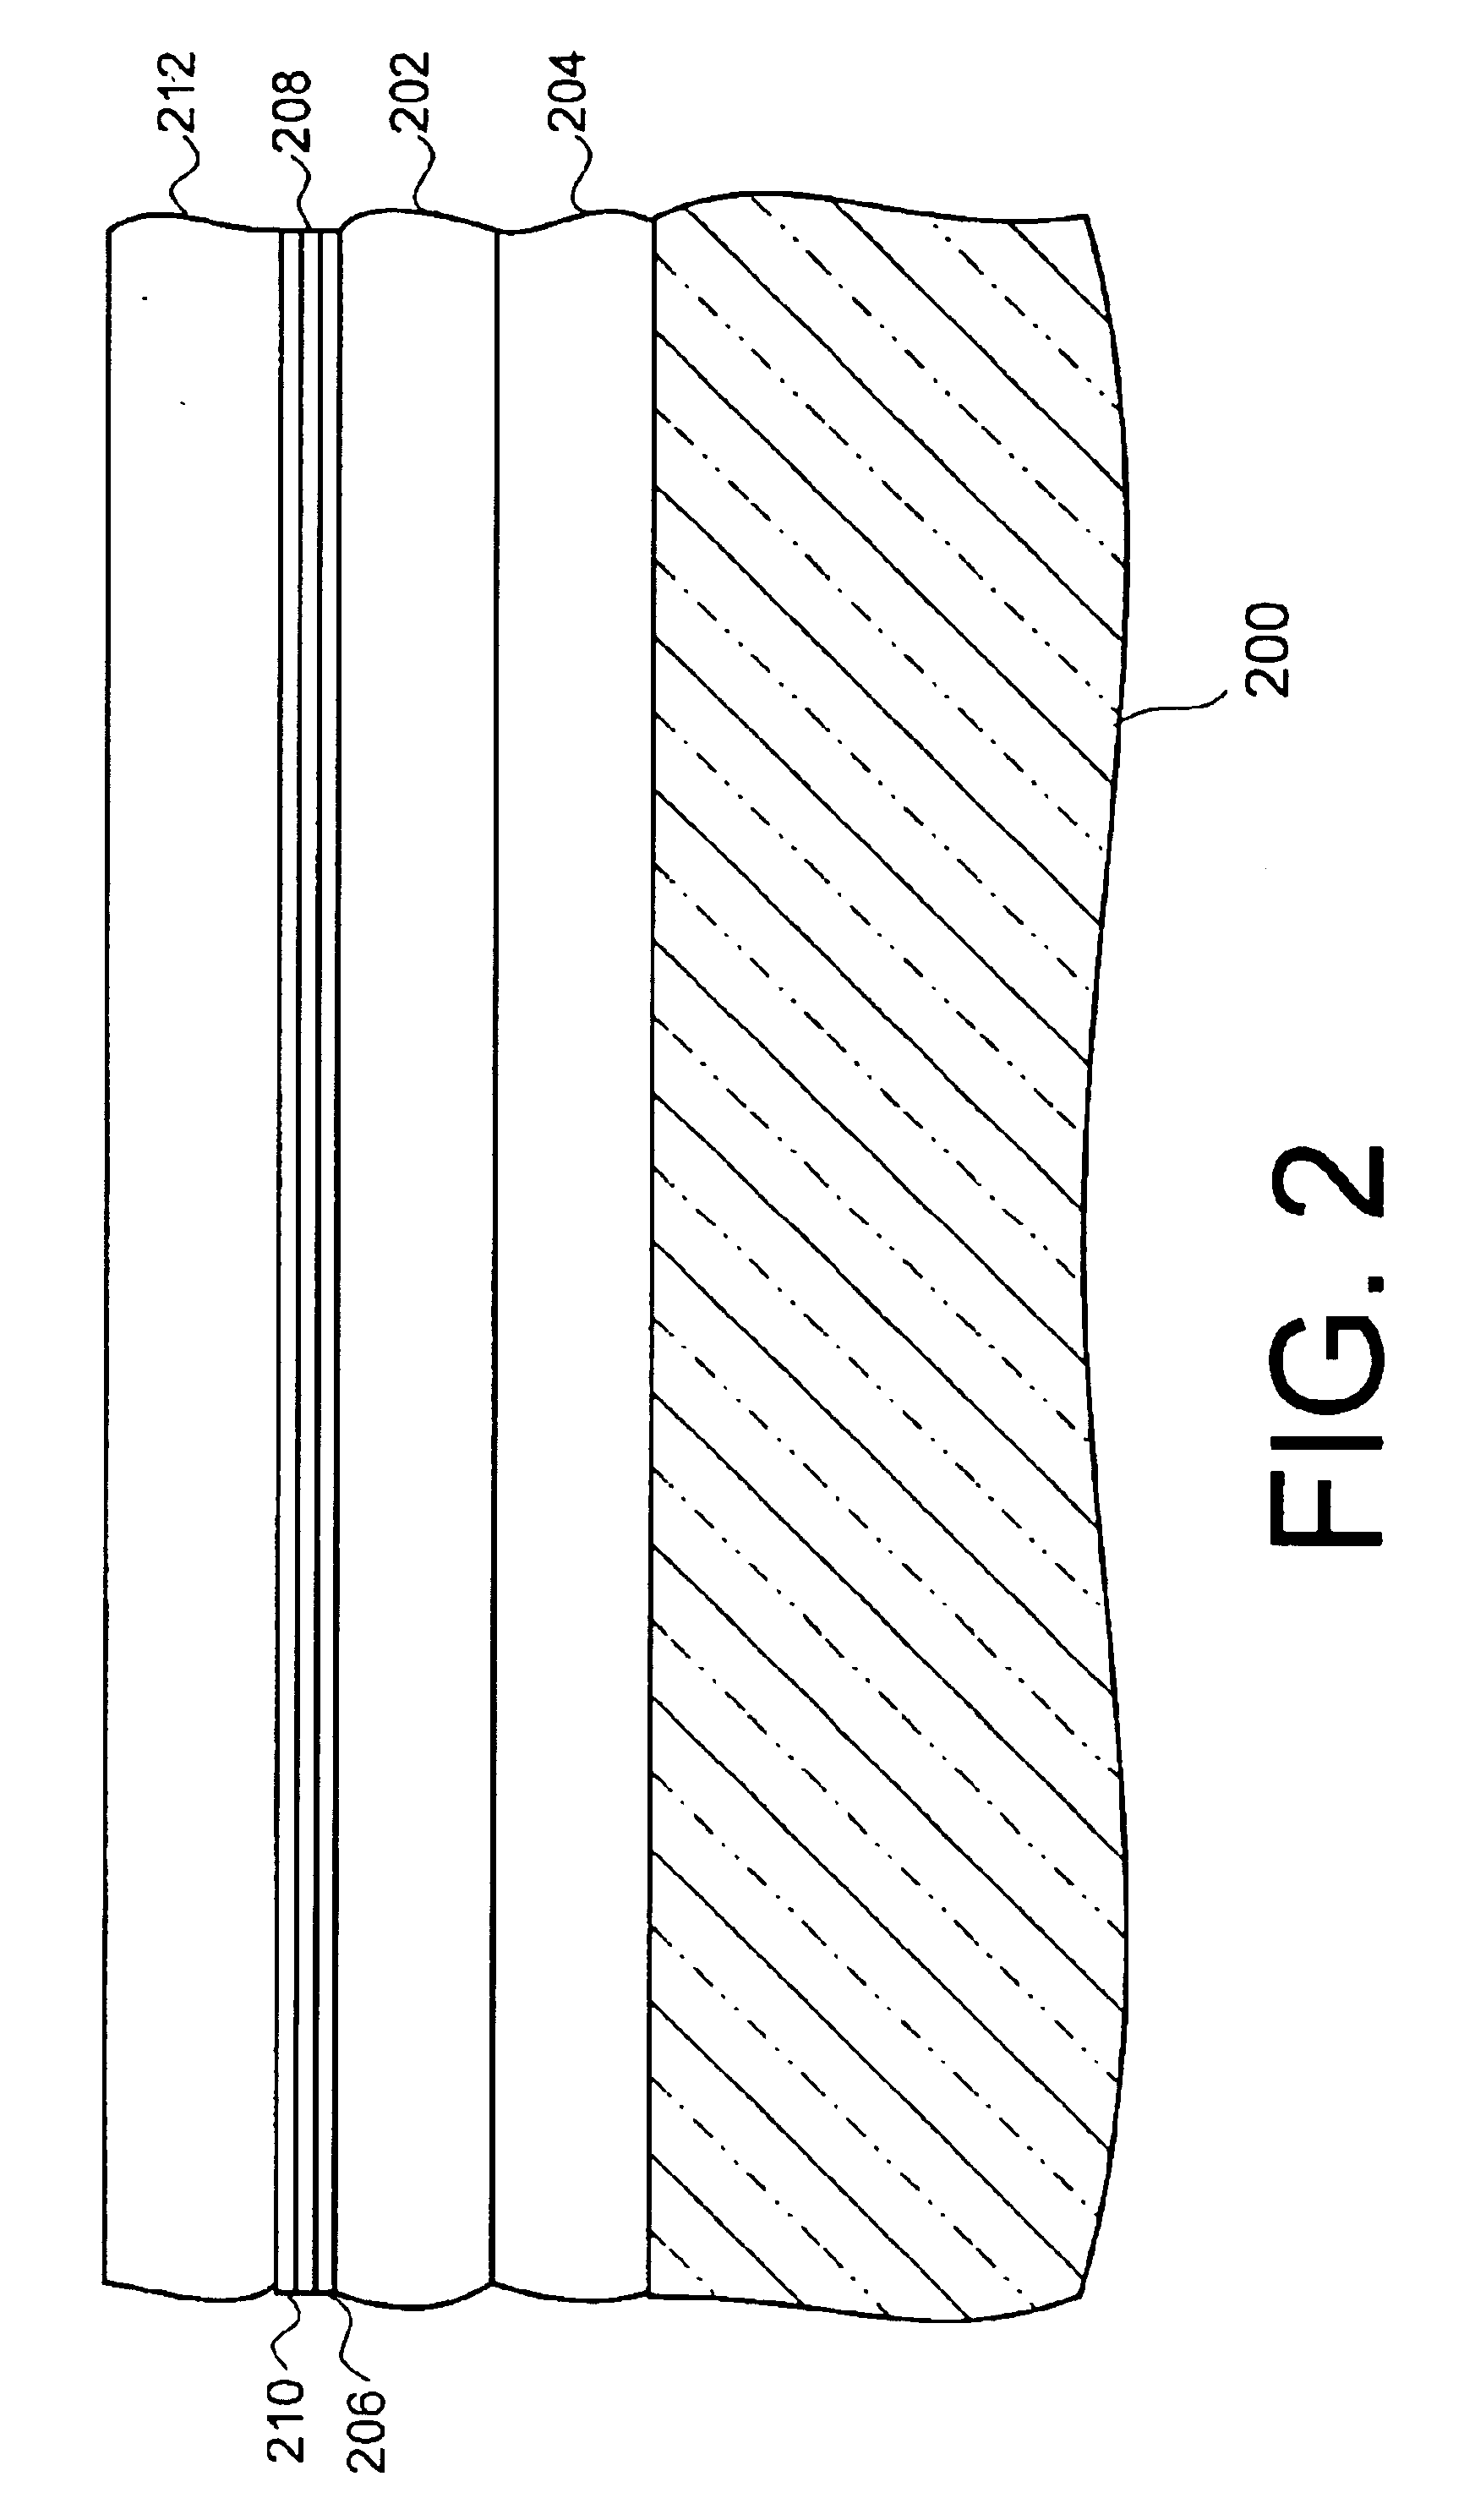 Double gated vertical transistor with different first and second gate materials